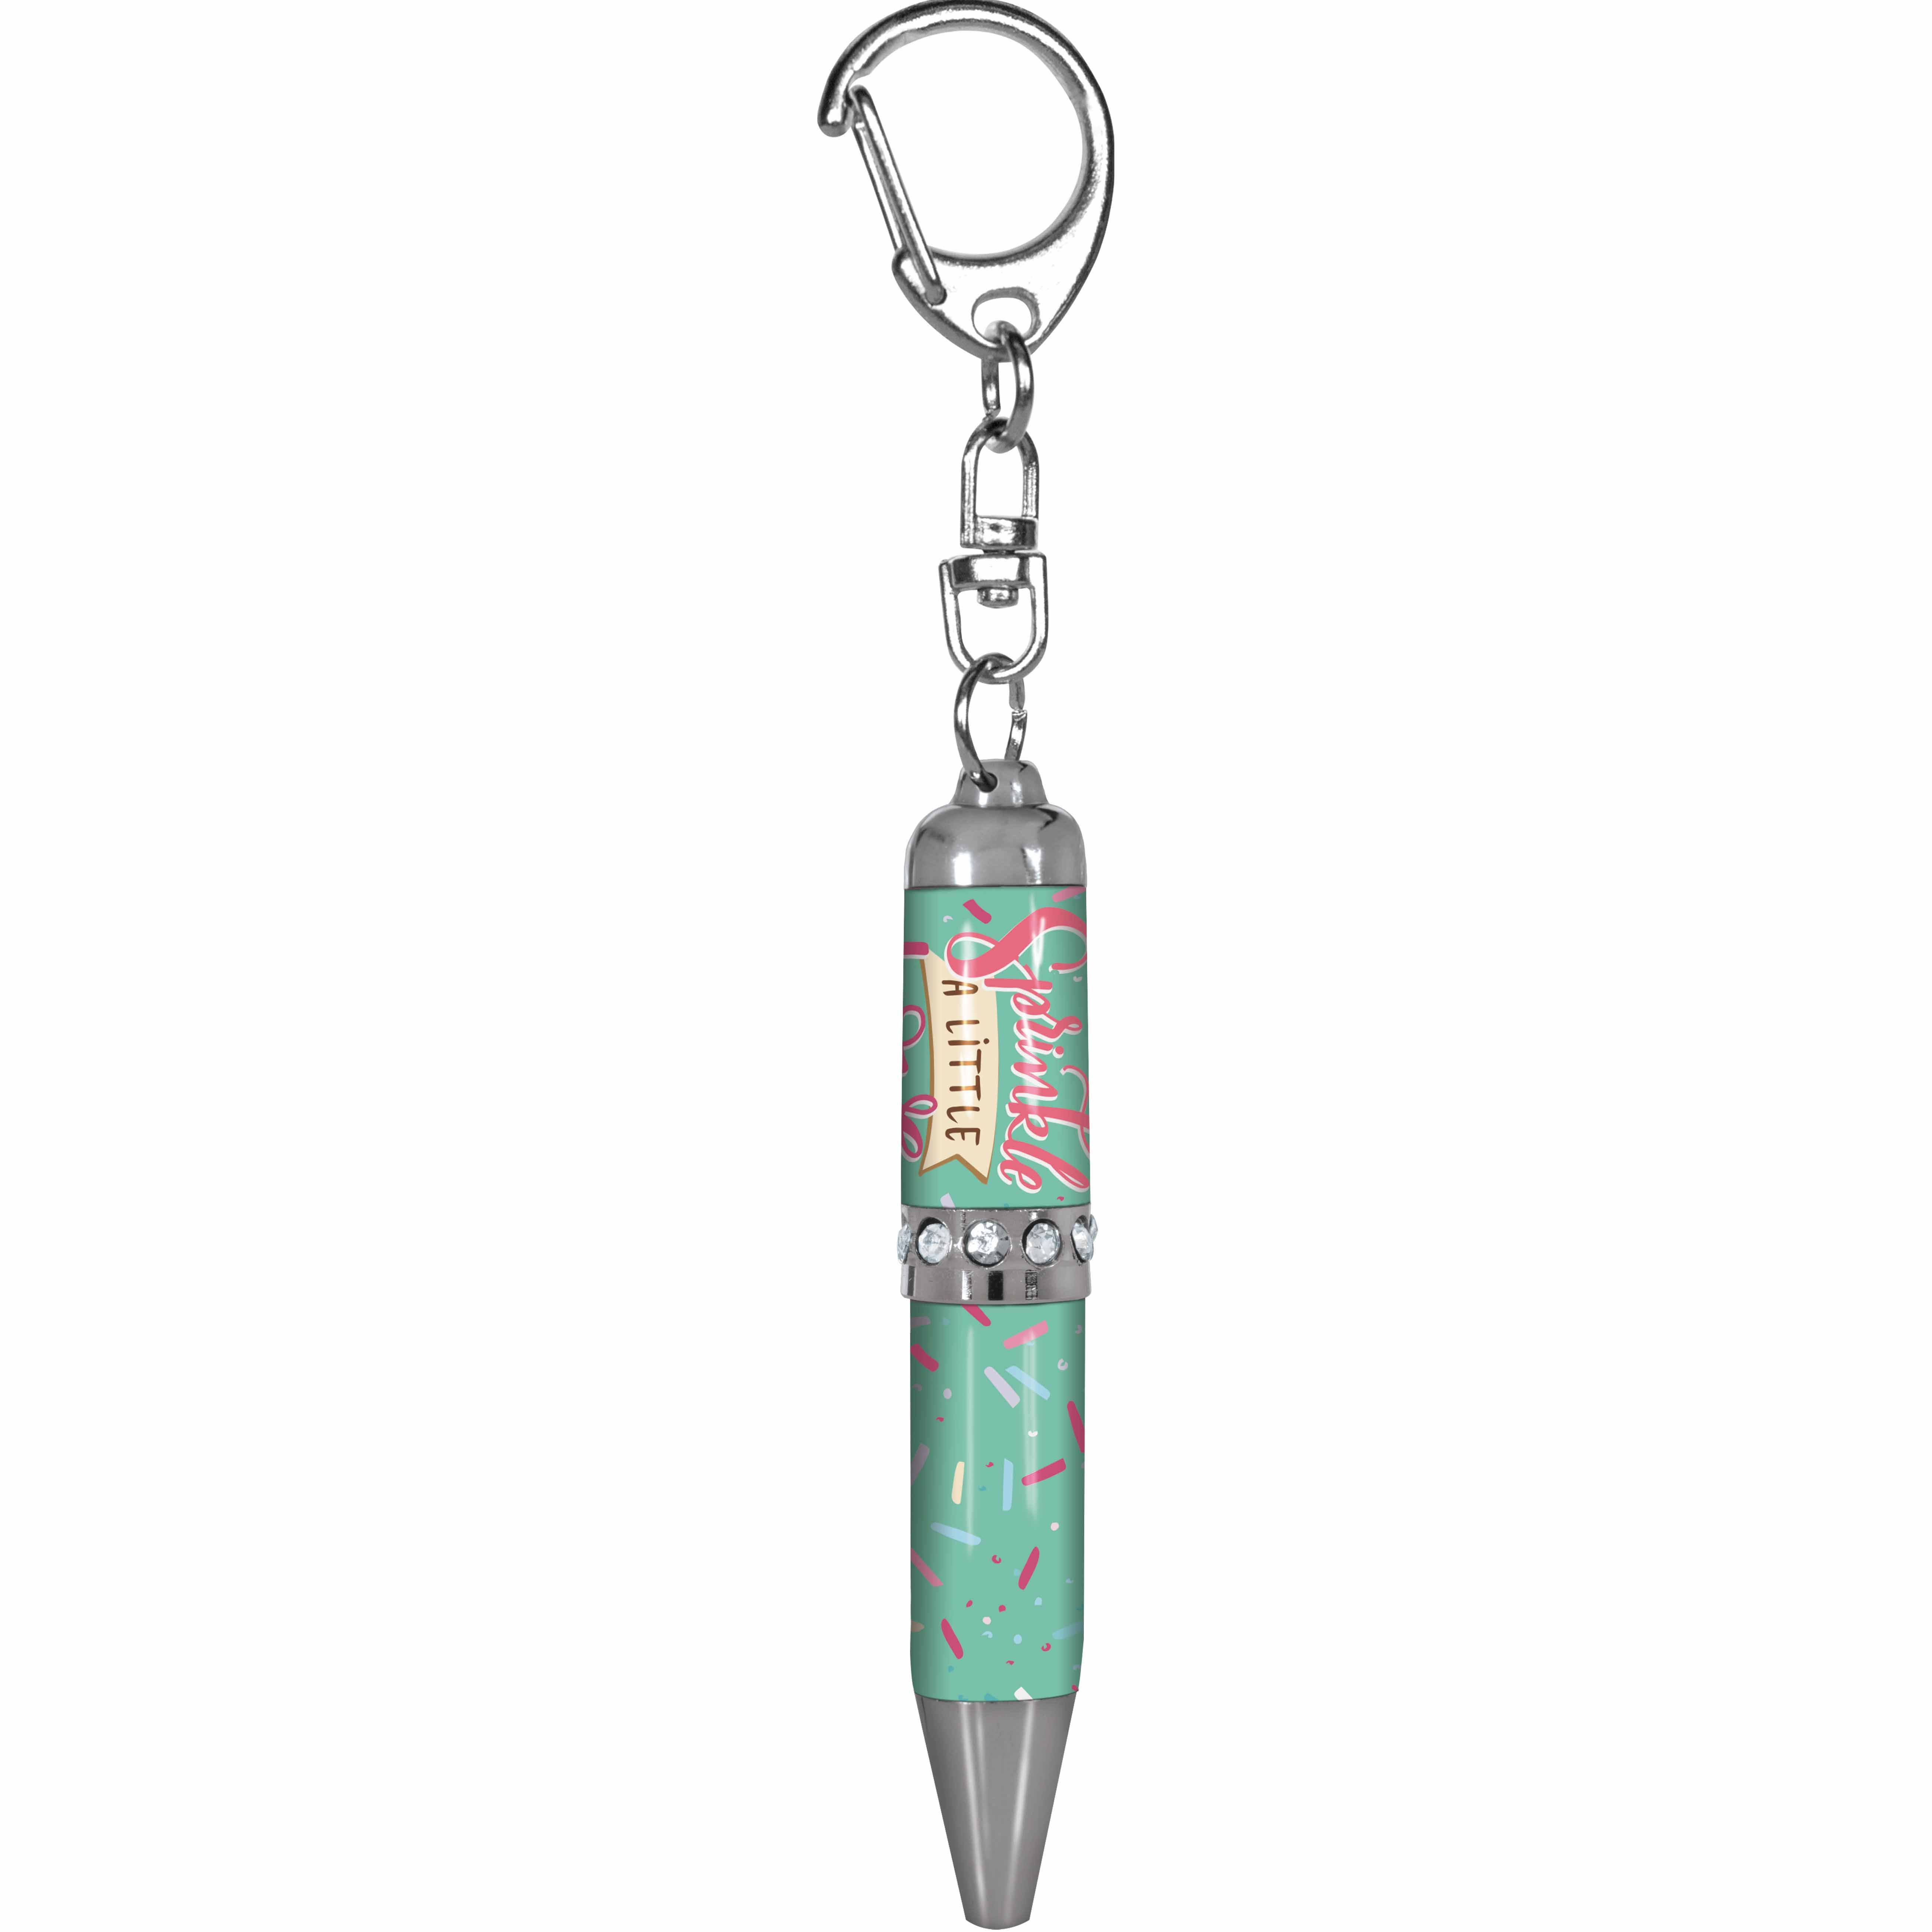 AngelStar, Life Is Sweet Sprinkle A Little Love Mini Pen, Mint Green, 4 1/2 Inches